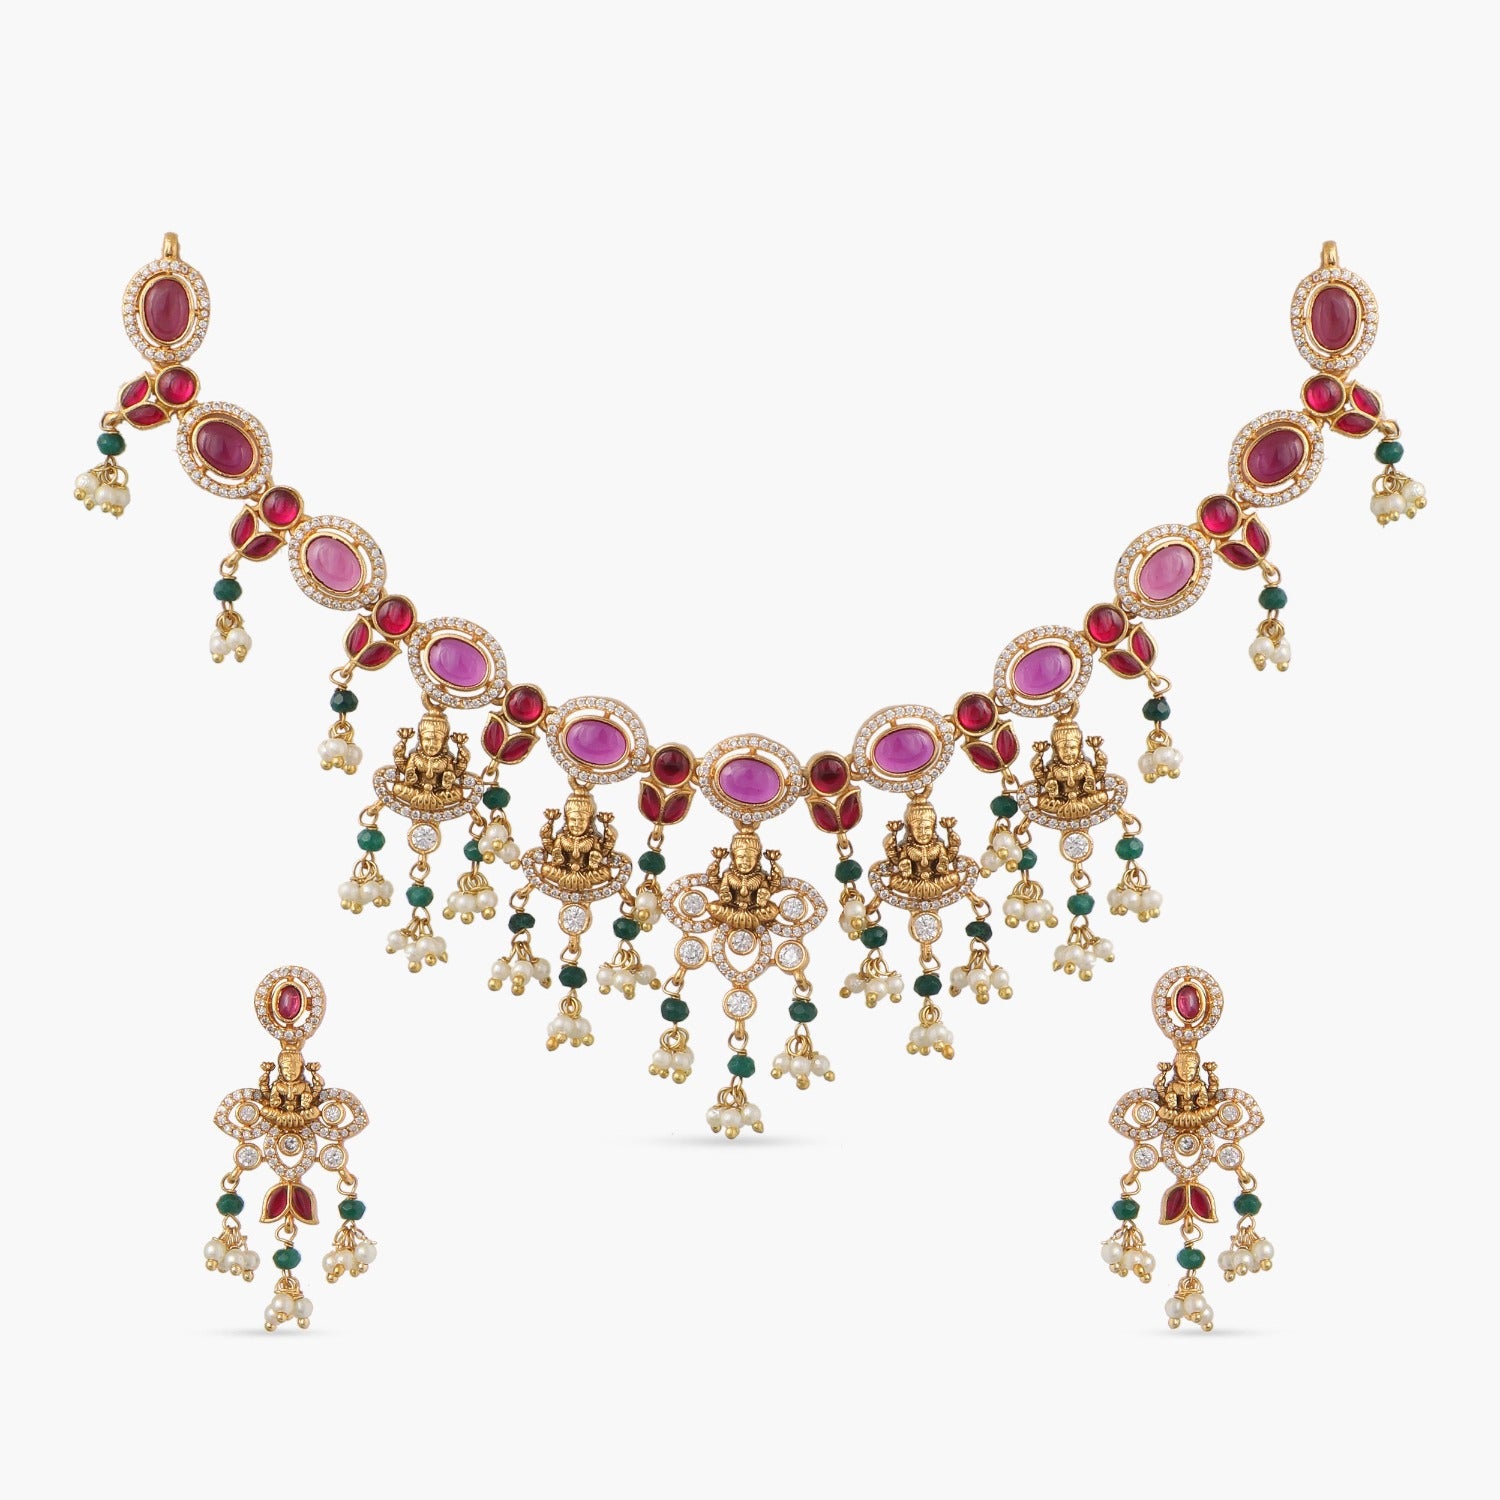 A picture of an Indian artificial gold plated necklace set with red and green gemstones, featuring five pendants with Goddess Laxmi idols